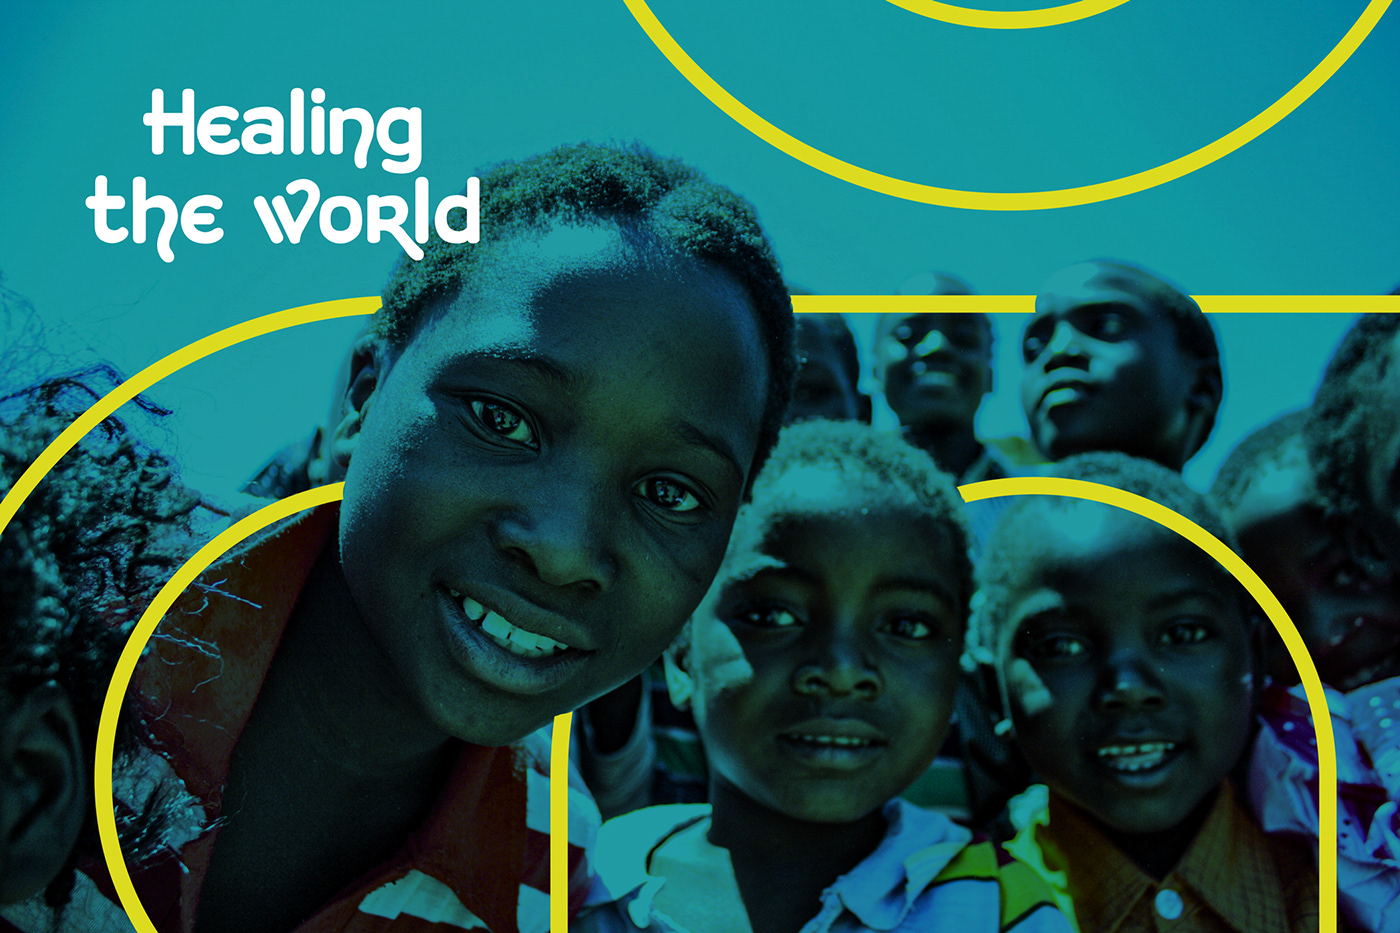 image contains the brand tagline and an images of African children